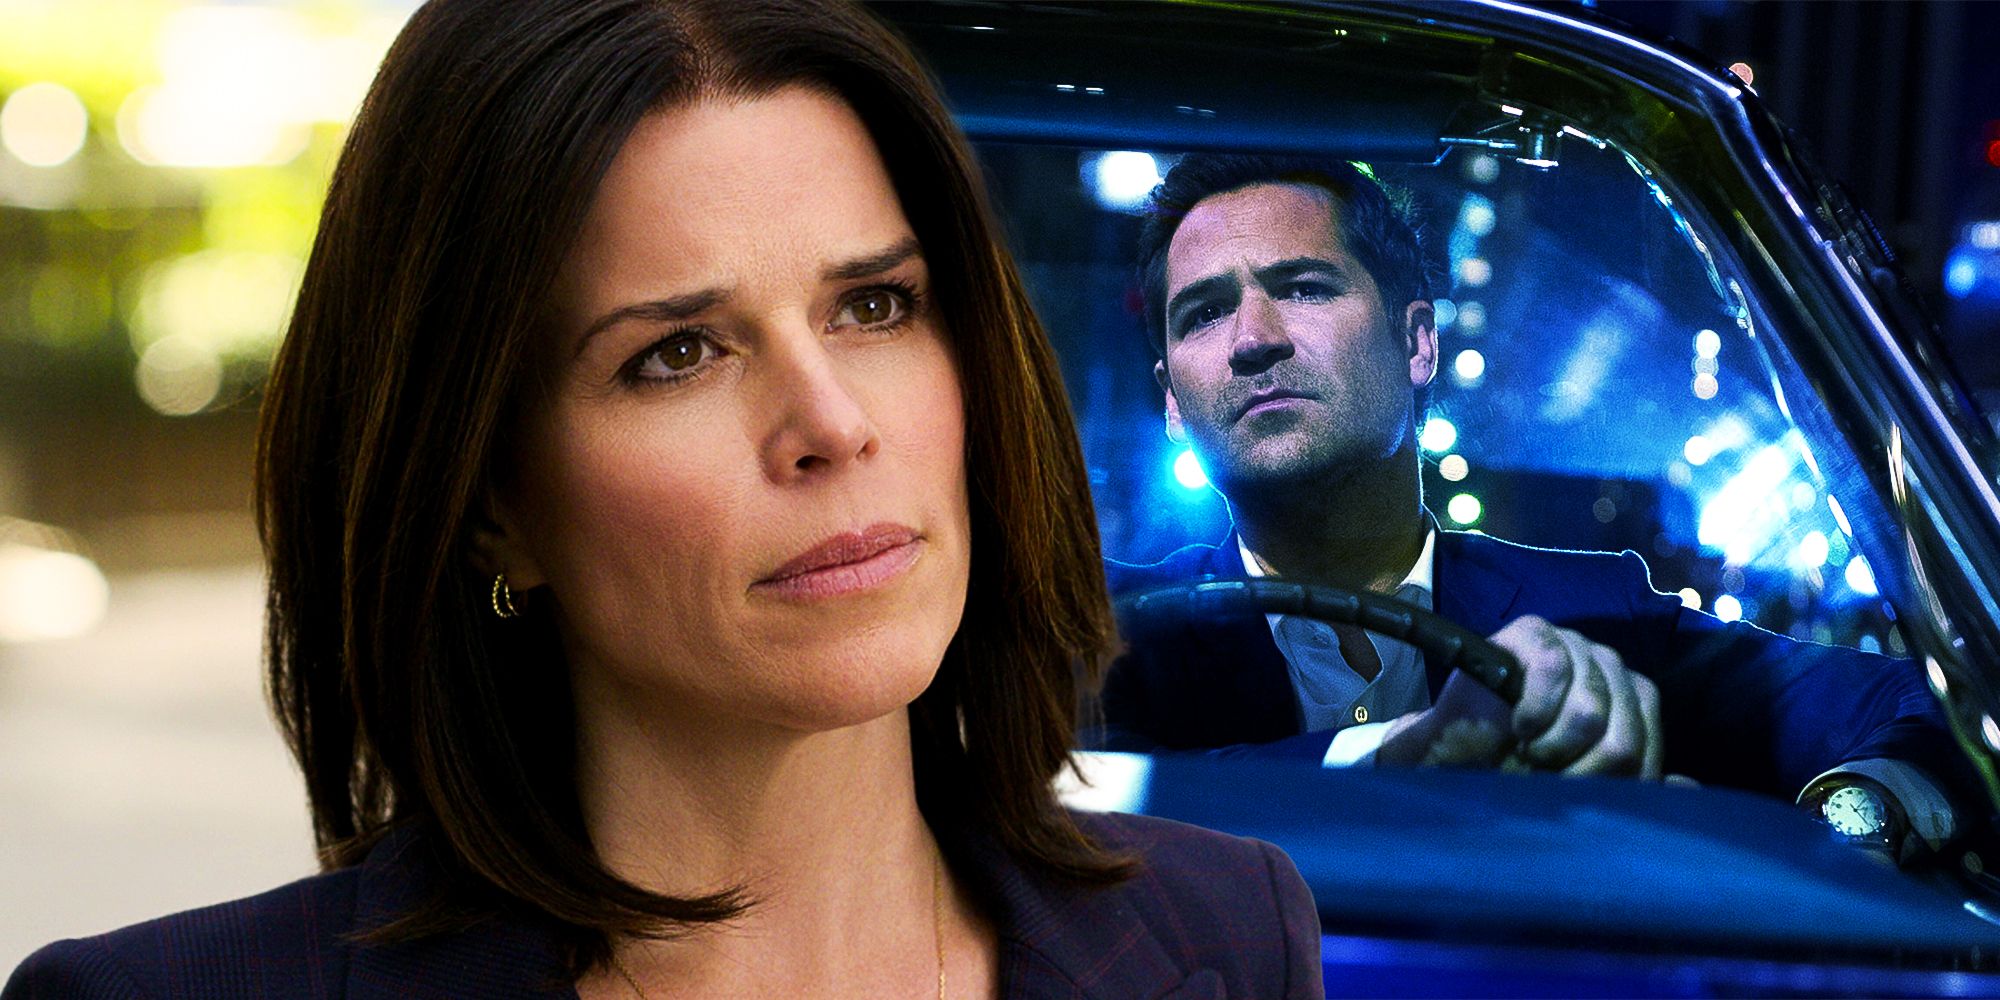 Neve Campbell as Maggie and Manuel Garcia-Rulfo as Mickey in The Lincoln Lawyer season 2